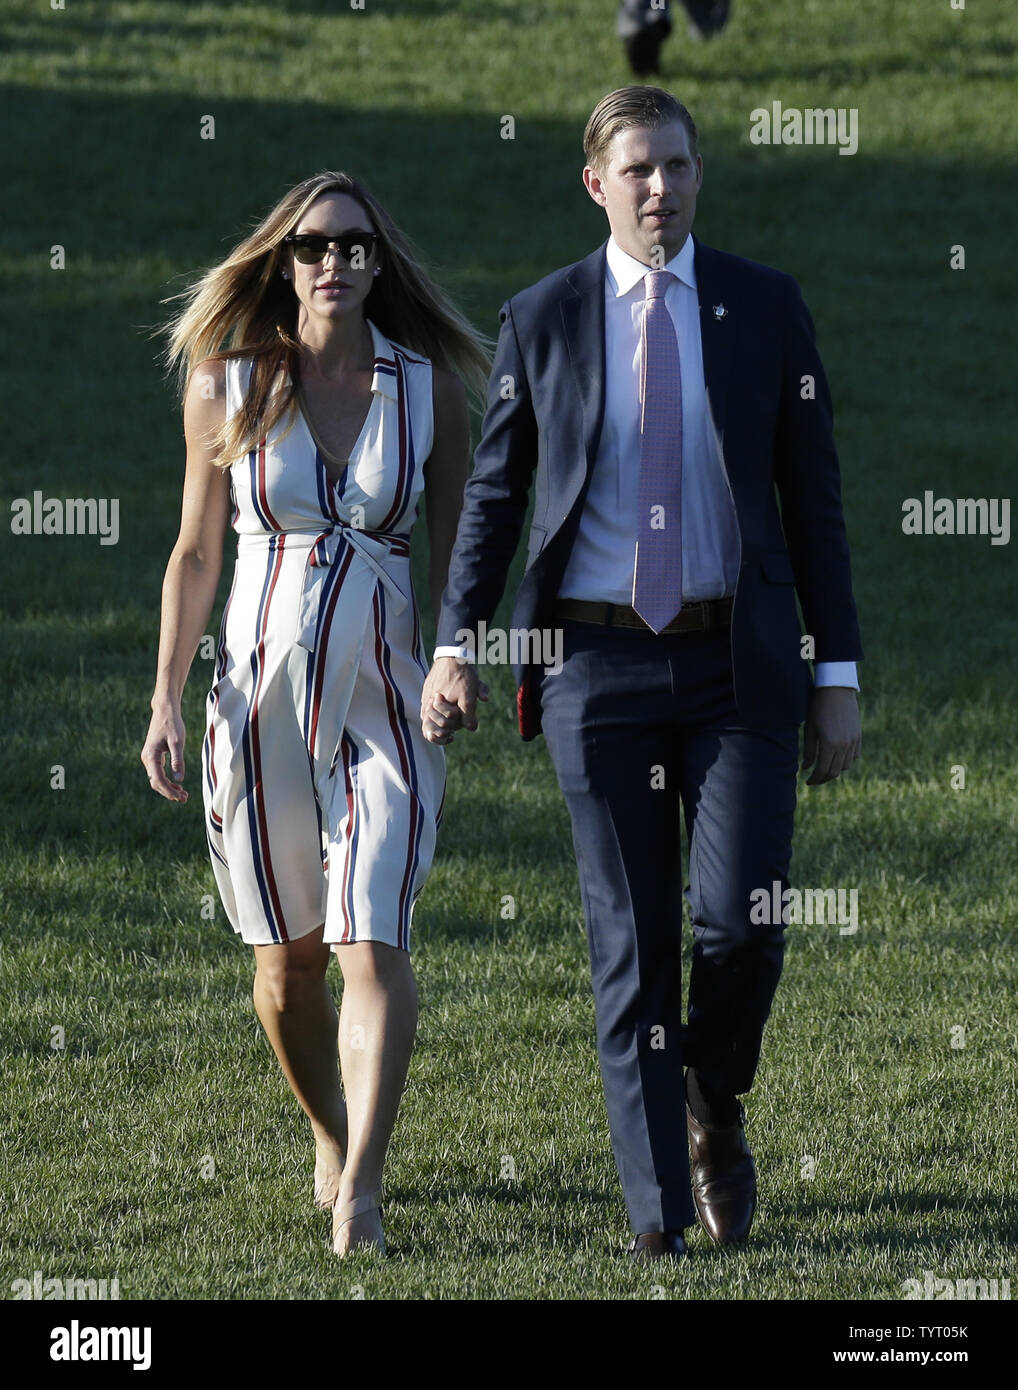 Eric and Lara Trump walk to the trophy ceremony at Trump National Golf Club after the final round of the LPGA U.S. Women's Open Championship in Bedminster, NJ on July 14, 2017. Sung Hyun Park of South Korea won her first major with a score of 11 under par.      Photo by John Angelillo/UPI Stock Photo